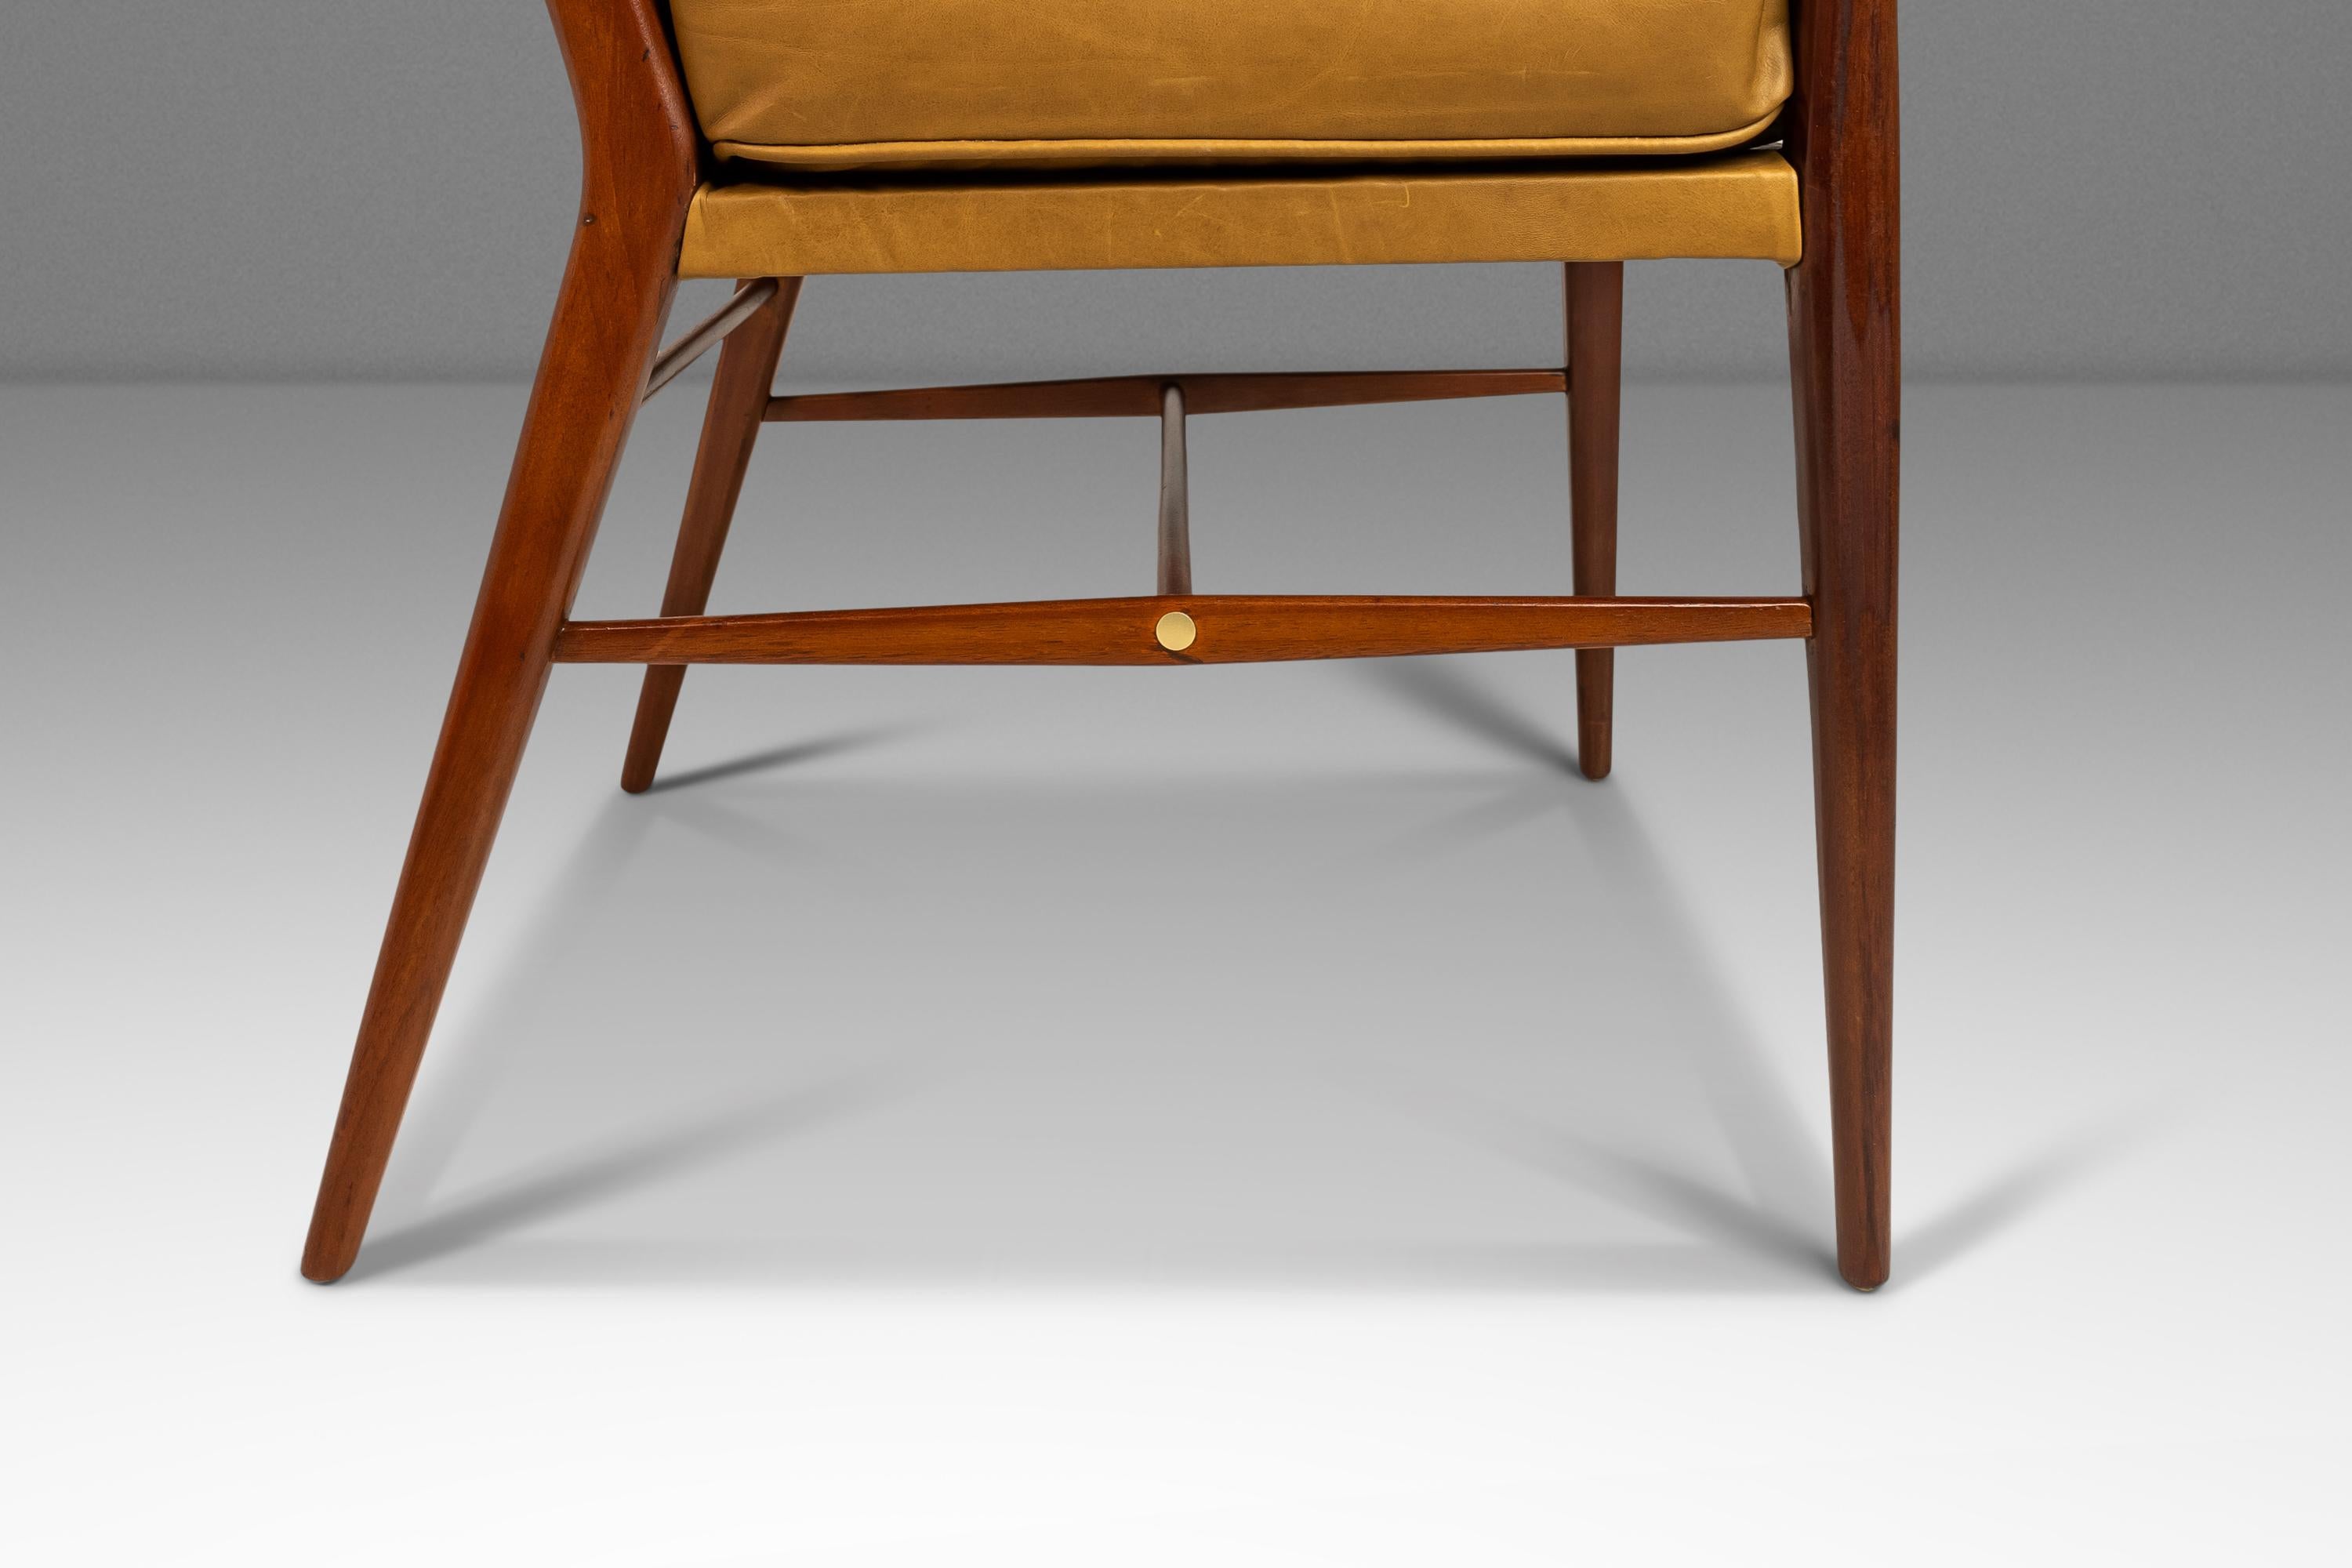 MCM Model 7001 Chair in Walnut by Paul McCobb for Directional, USA, c. 1950s For Sale 6